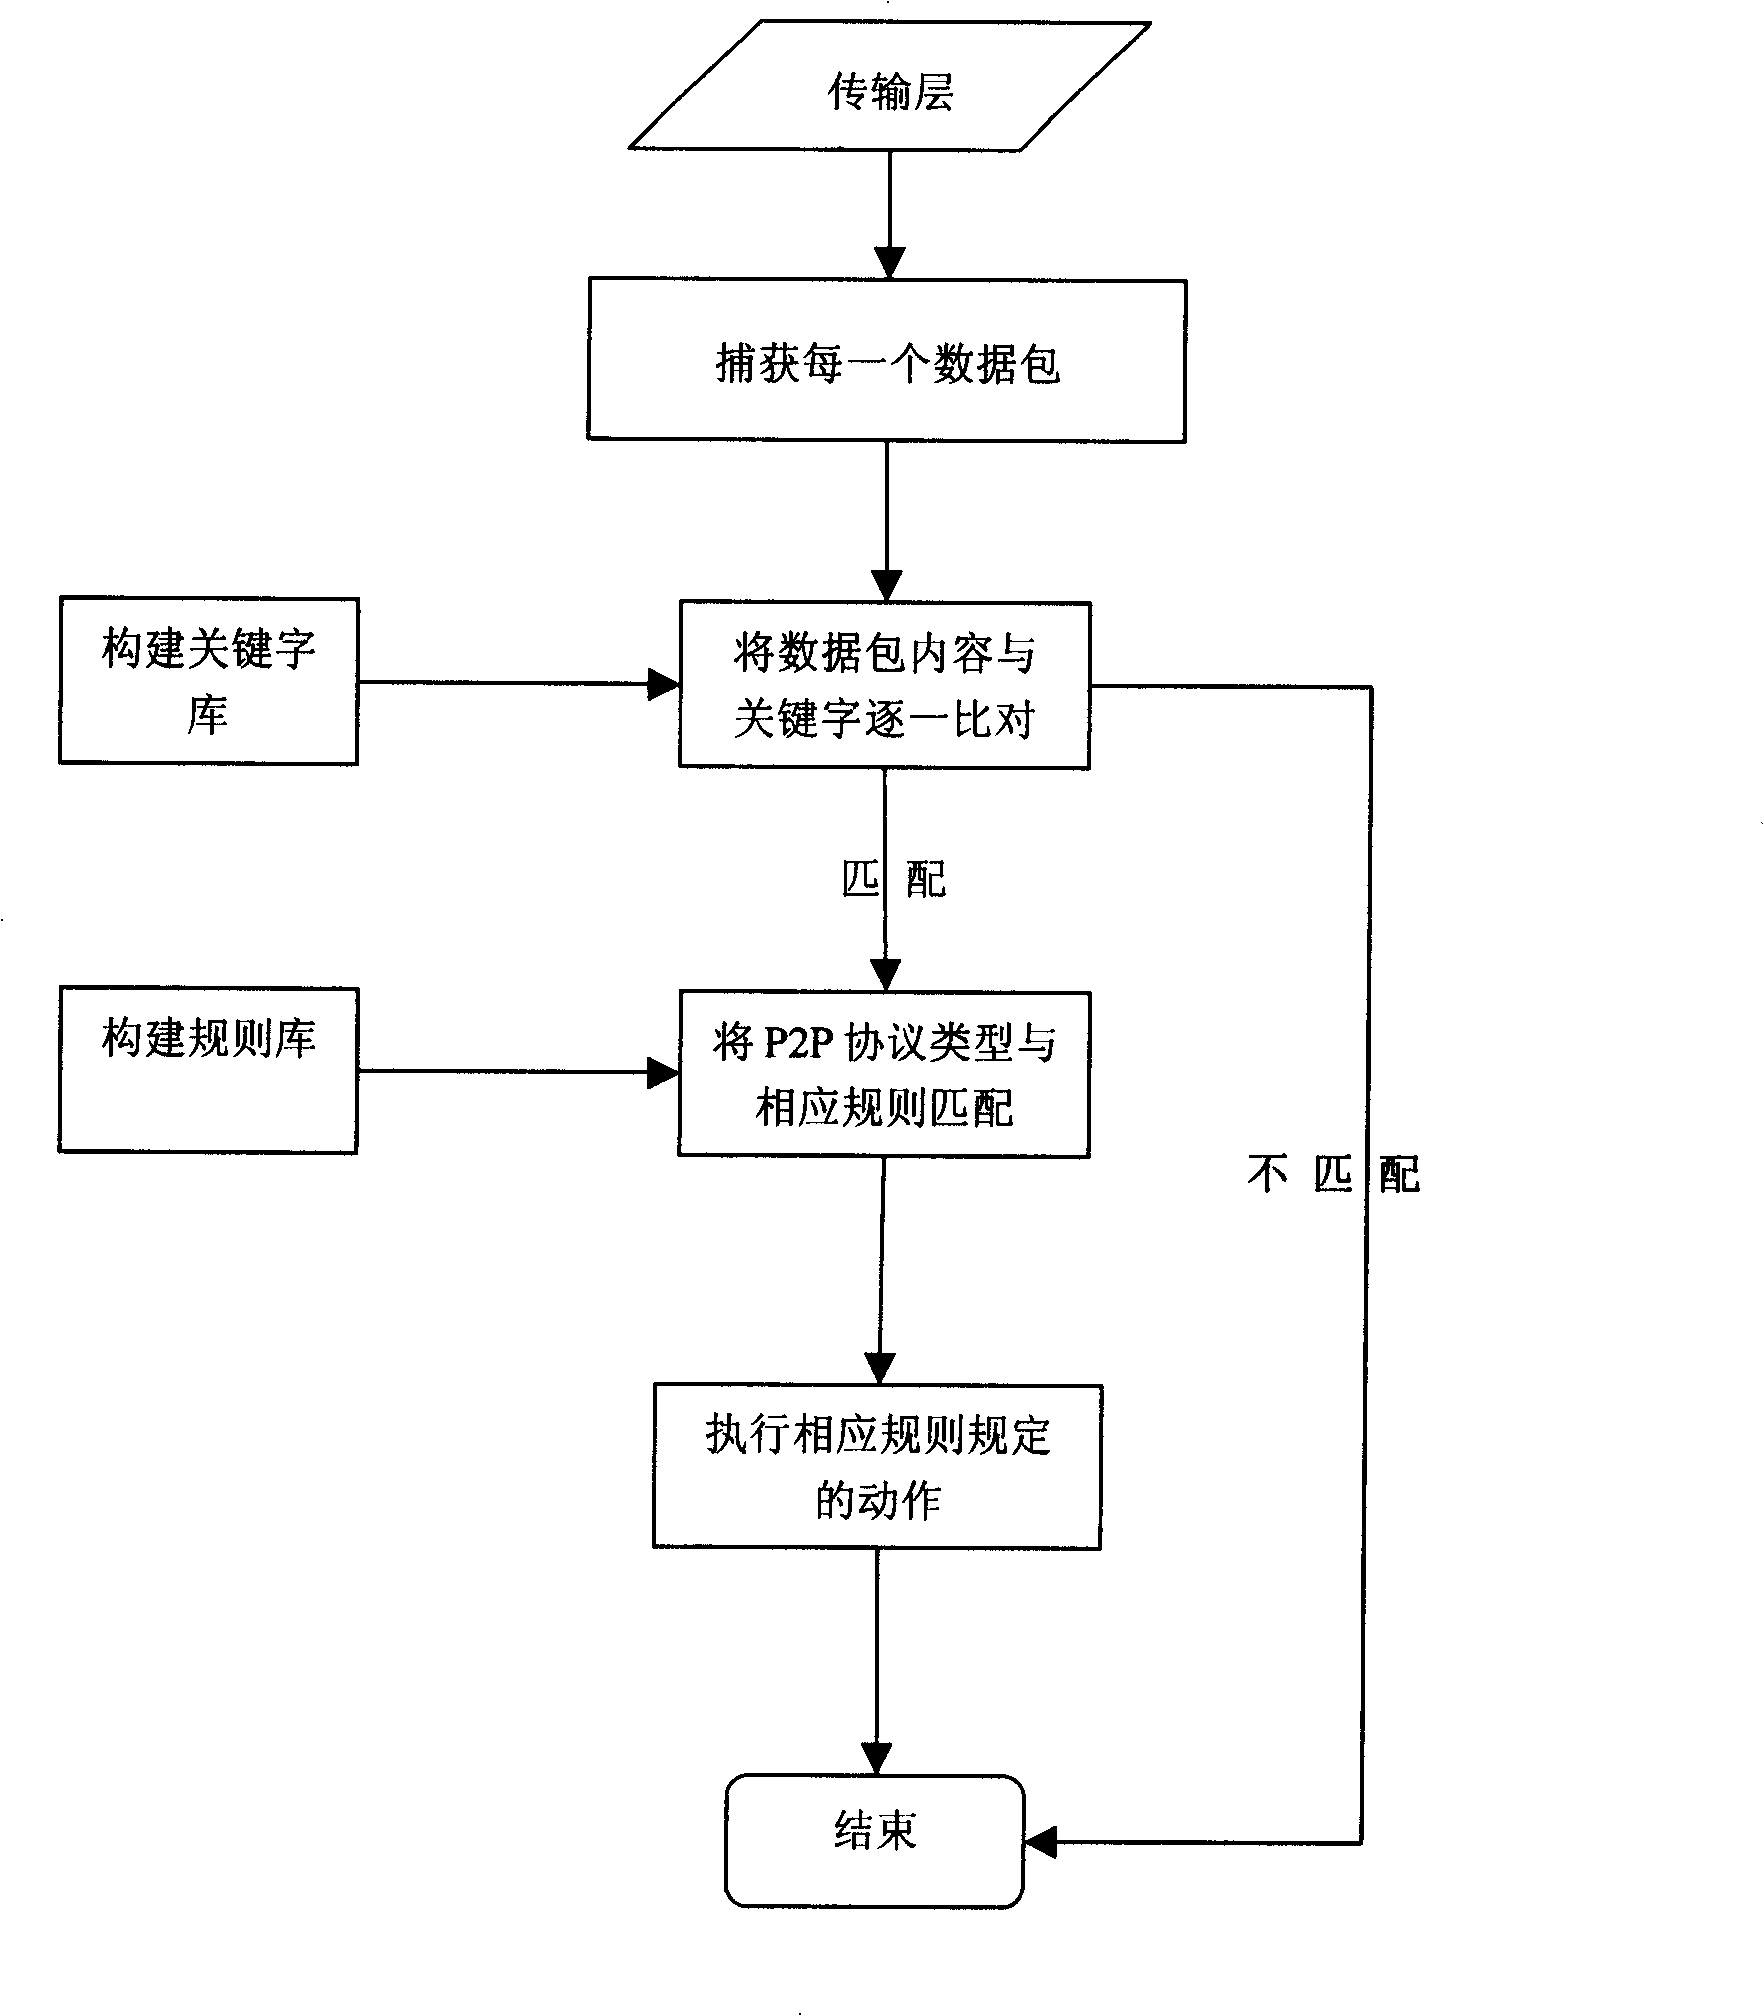 Method for discovering and controlling of producing flow based on P2P high speed unloading software